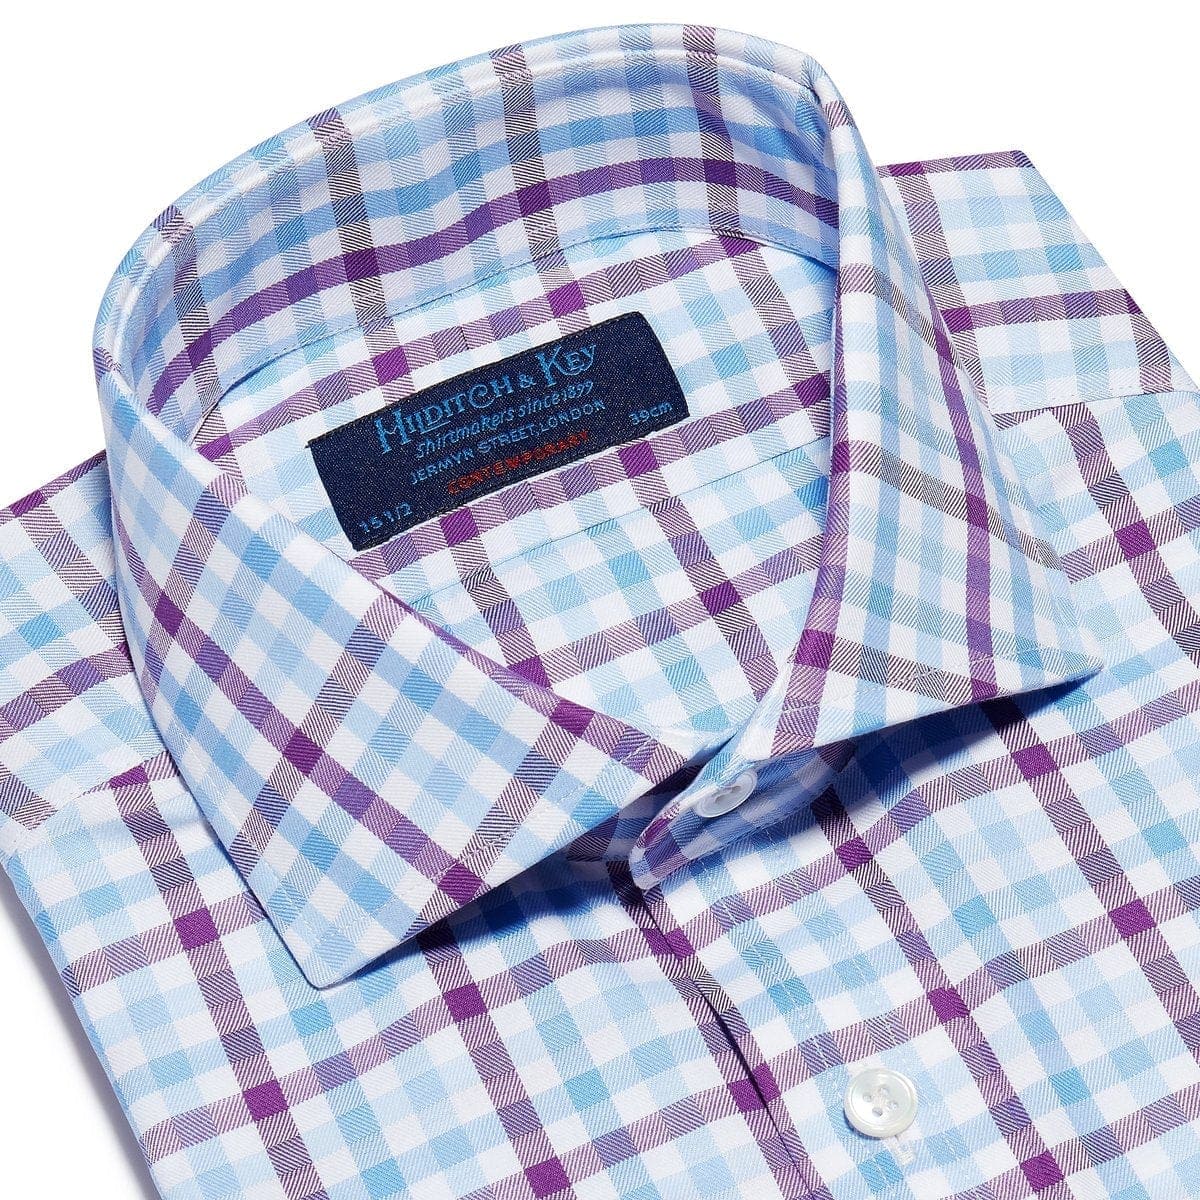 Contemporary Fit, Cut-away Collar, 2 Button Cuff Purple, Blue & White Large Check Twill Cotton Shirt